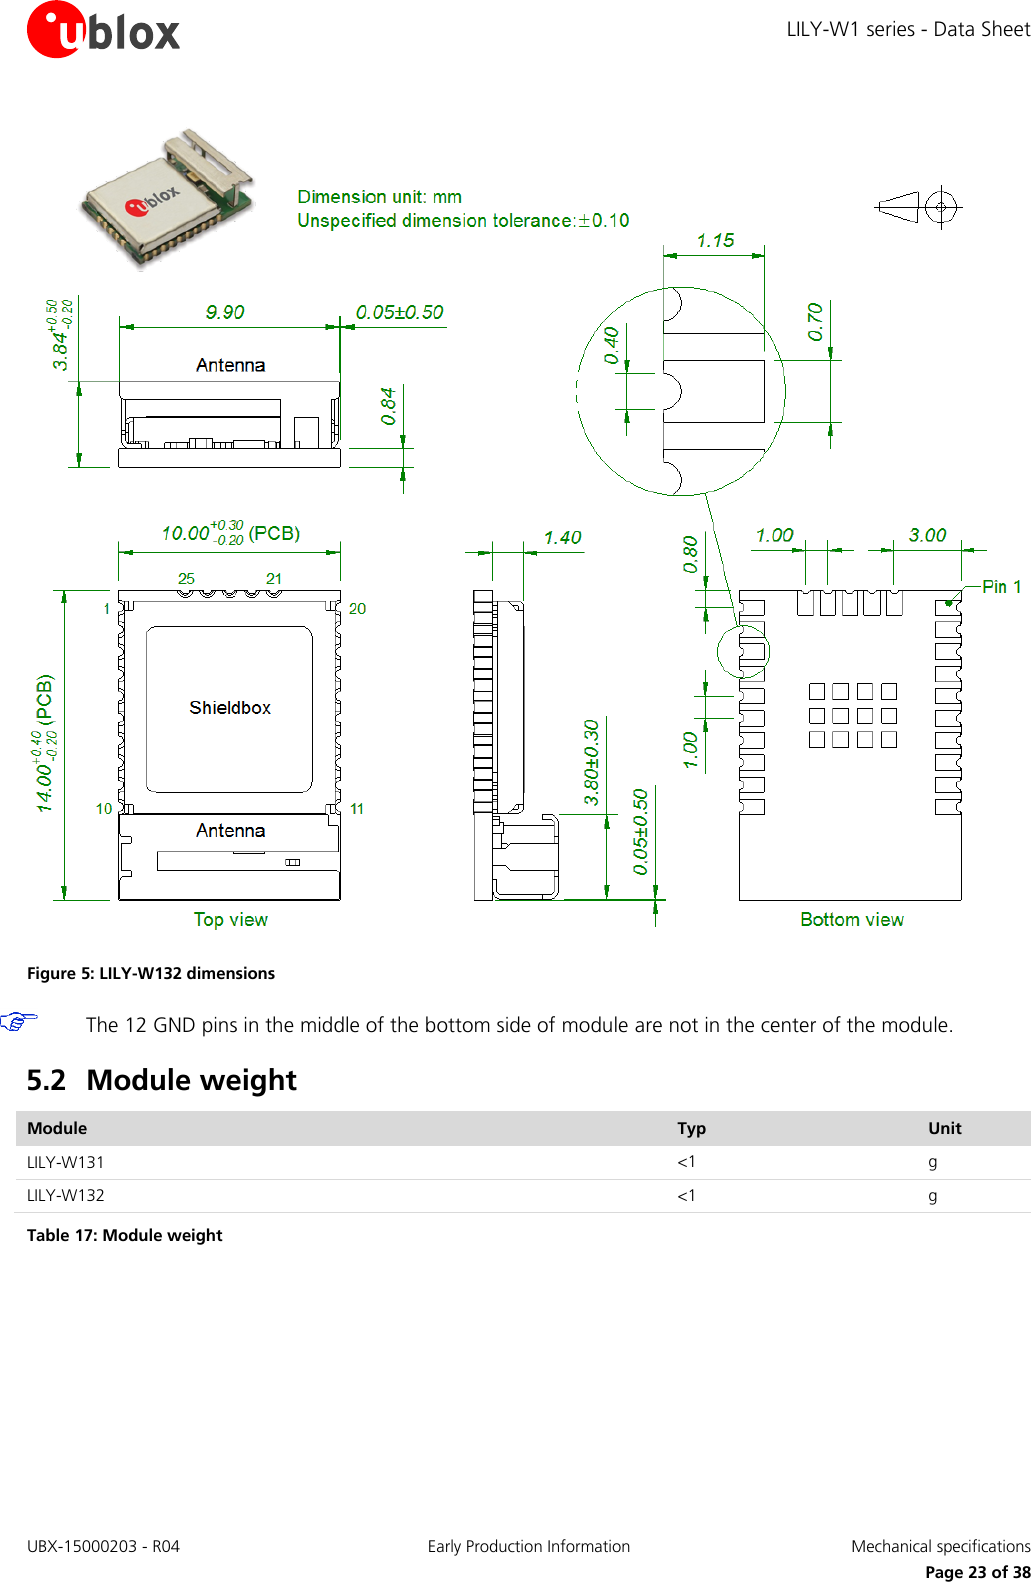 LILY-W1 series - Data Sheet UBX-15000203 - R04 Early Production Information  Mechanical specifications     Page 23 of 38  Figure 5: LILY-W132 dimensions  The 12 GND pins in the middle of the bottom side of module are not in the center of the module. 5.2 Module weight Module Typ Unit LILY-W131 &lt;1 g LILY-W132 &lt;1 g Table 17: Module weight 